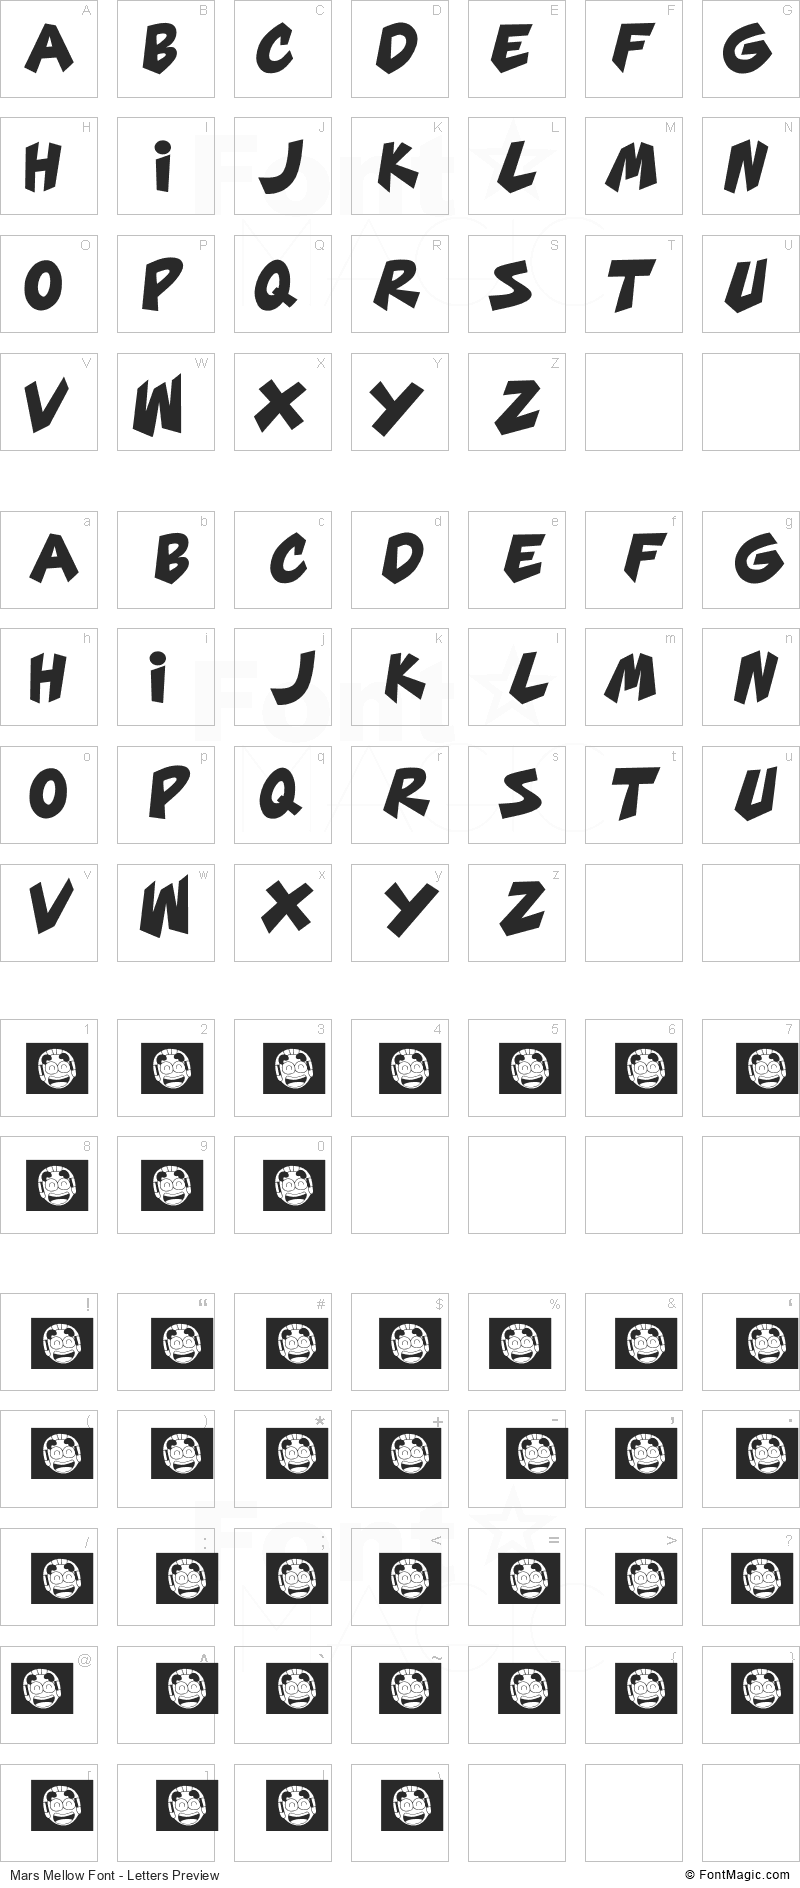 Mars Mellow Font - All Latters Preview Chart